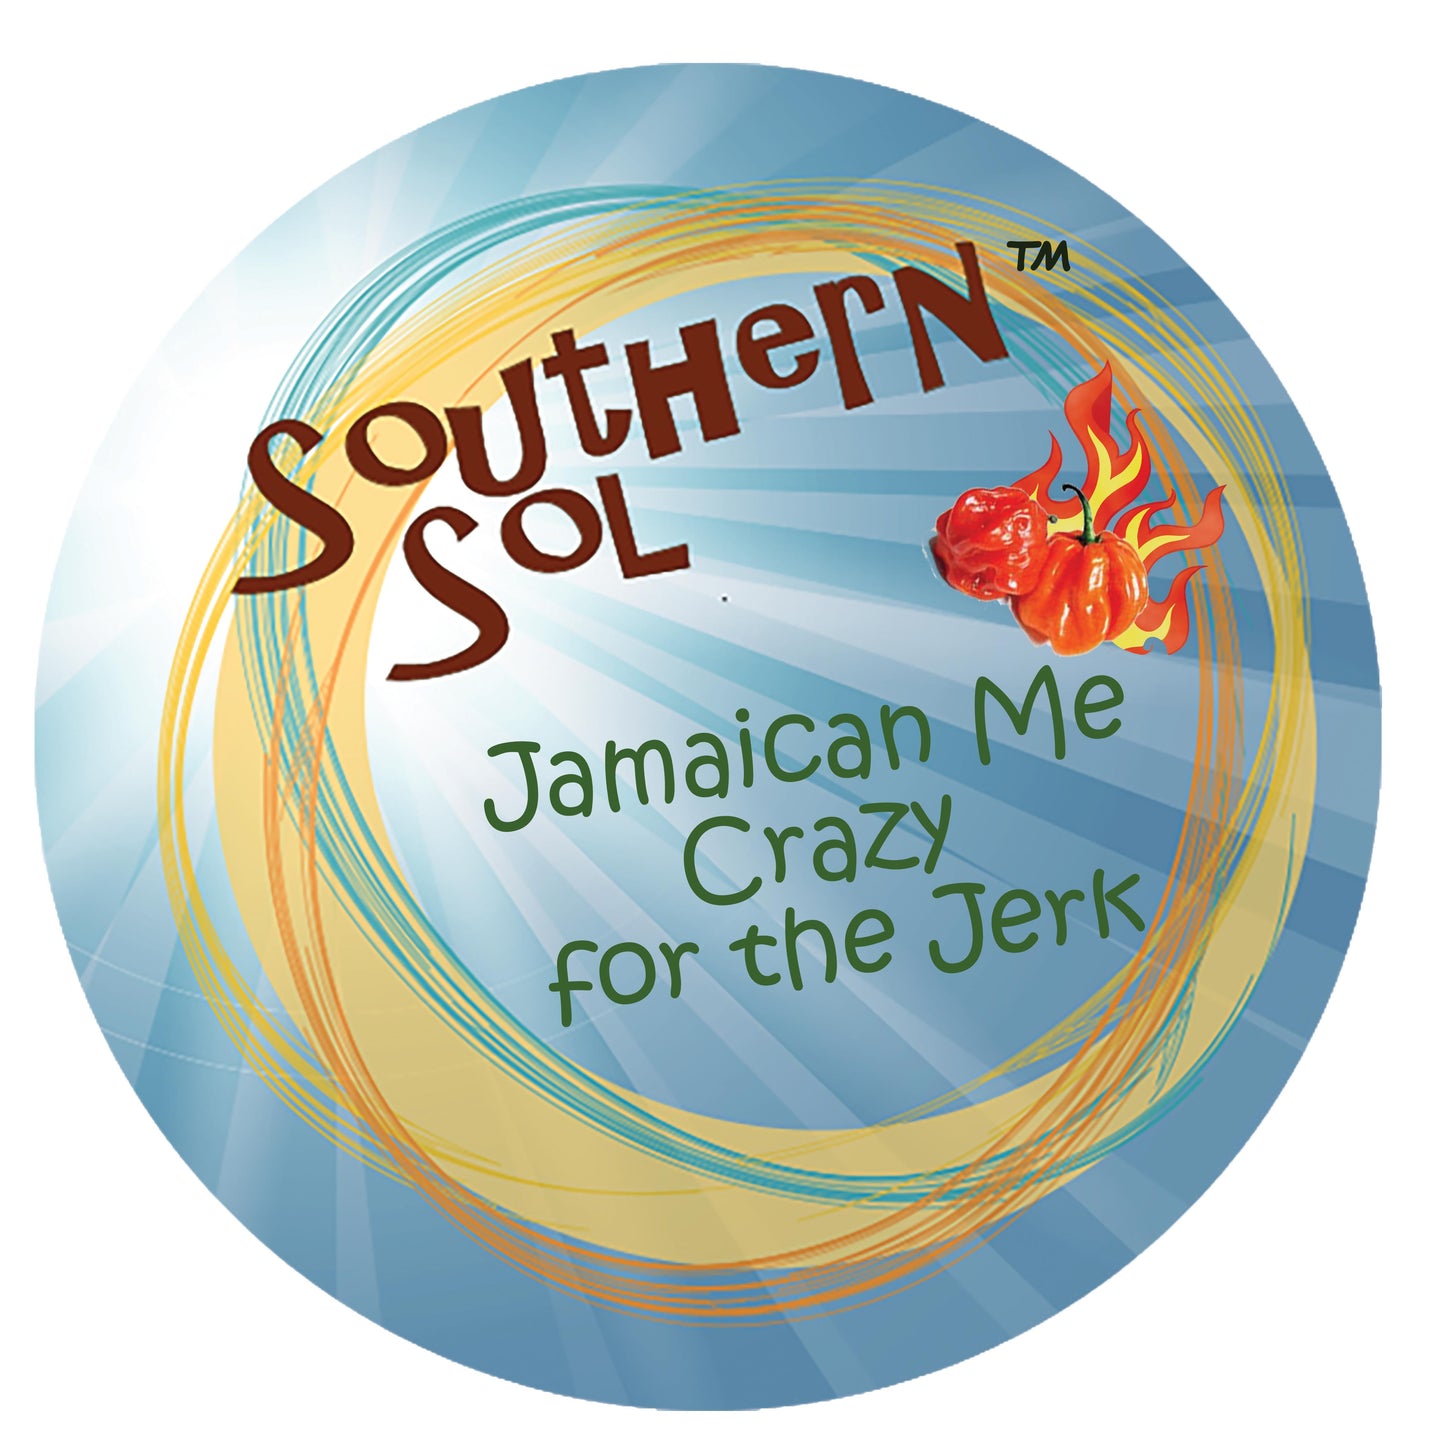 Jamaican Me Crazy for that Jerk - Southern Sol